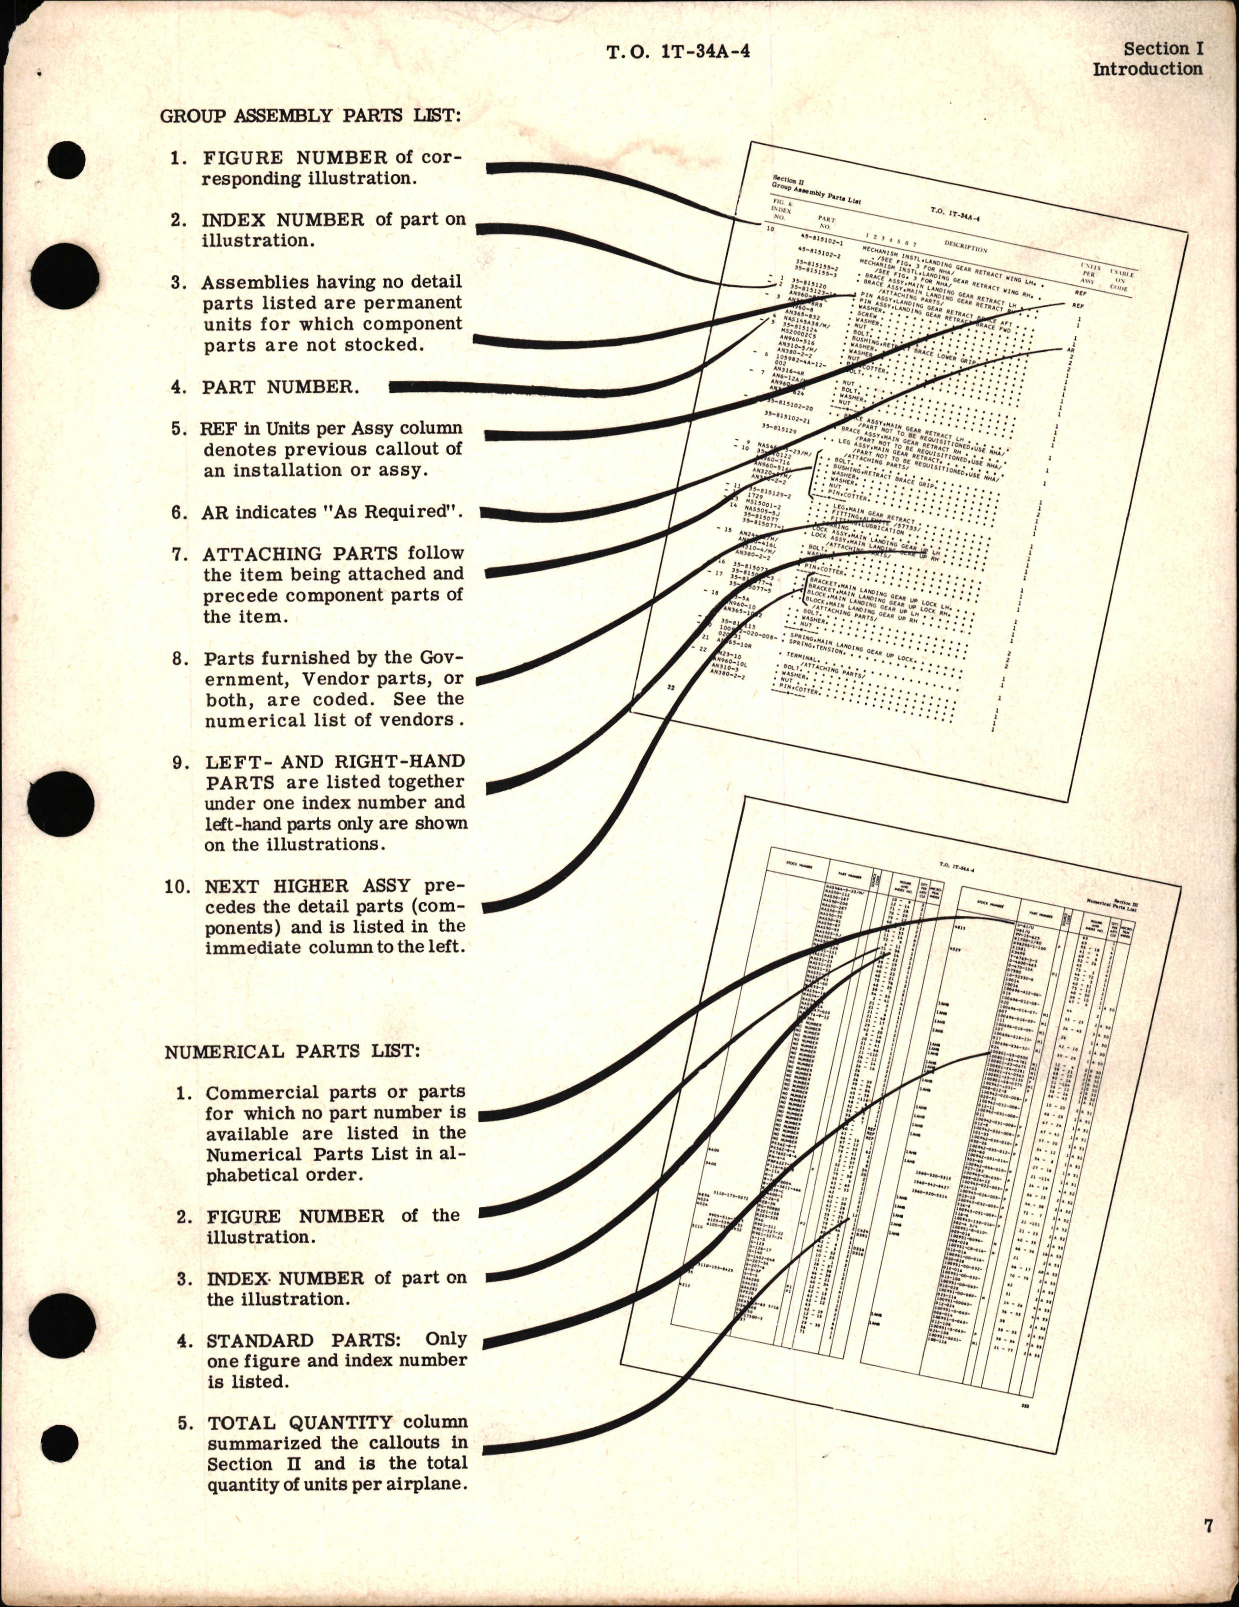 Sample page 5 from AirCorps Library document: Parts Catalog for T-34A